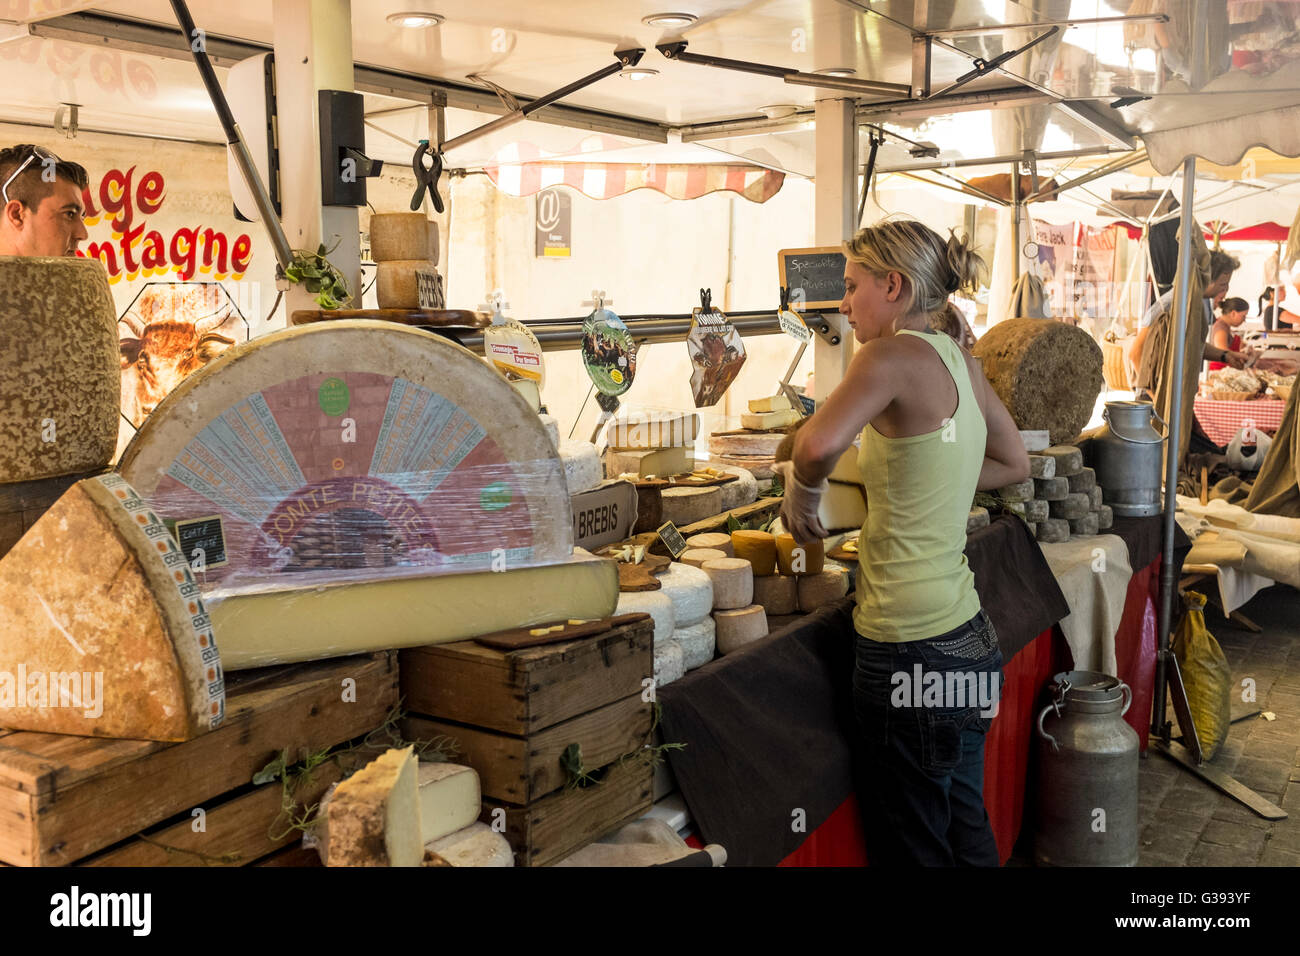 Outdoor market stall in Lourmarin selling cheese, Luberon, Vaucluse, Provence-Alpes-Côte d'Azur, France Stock Photo